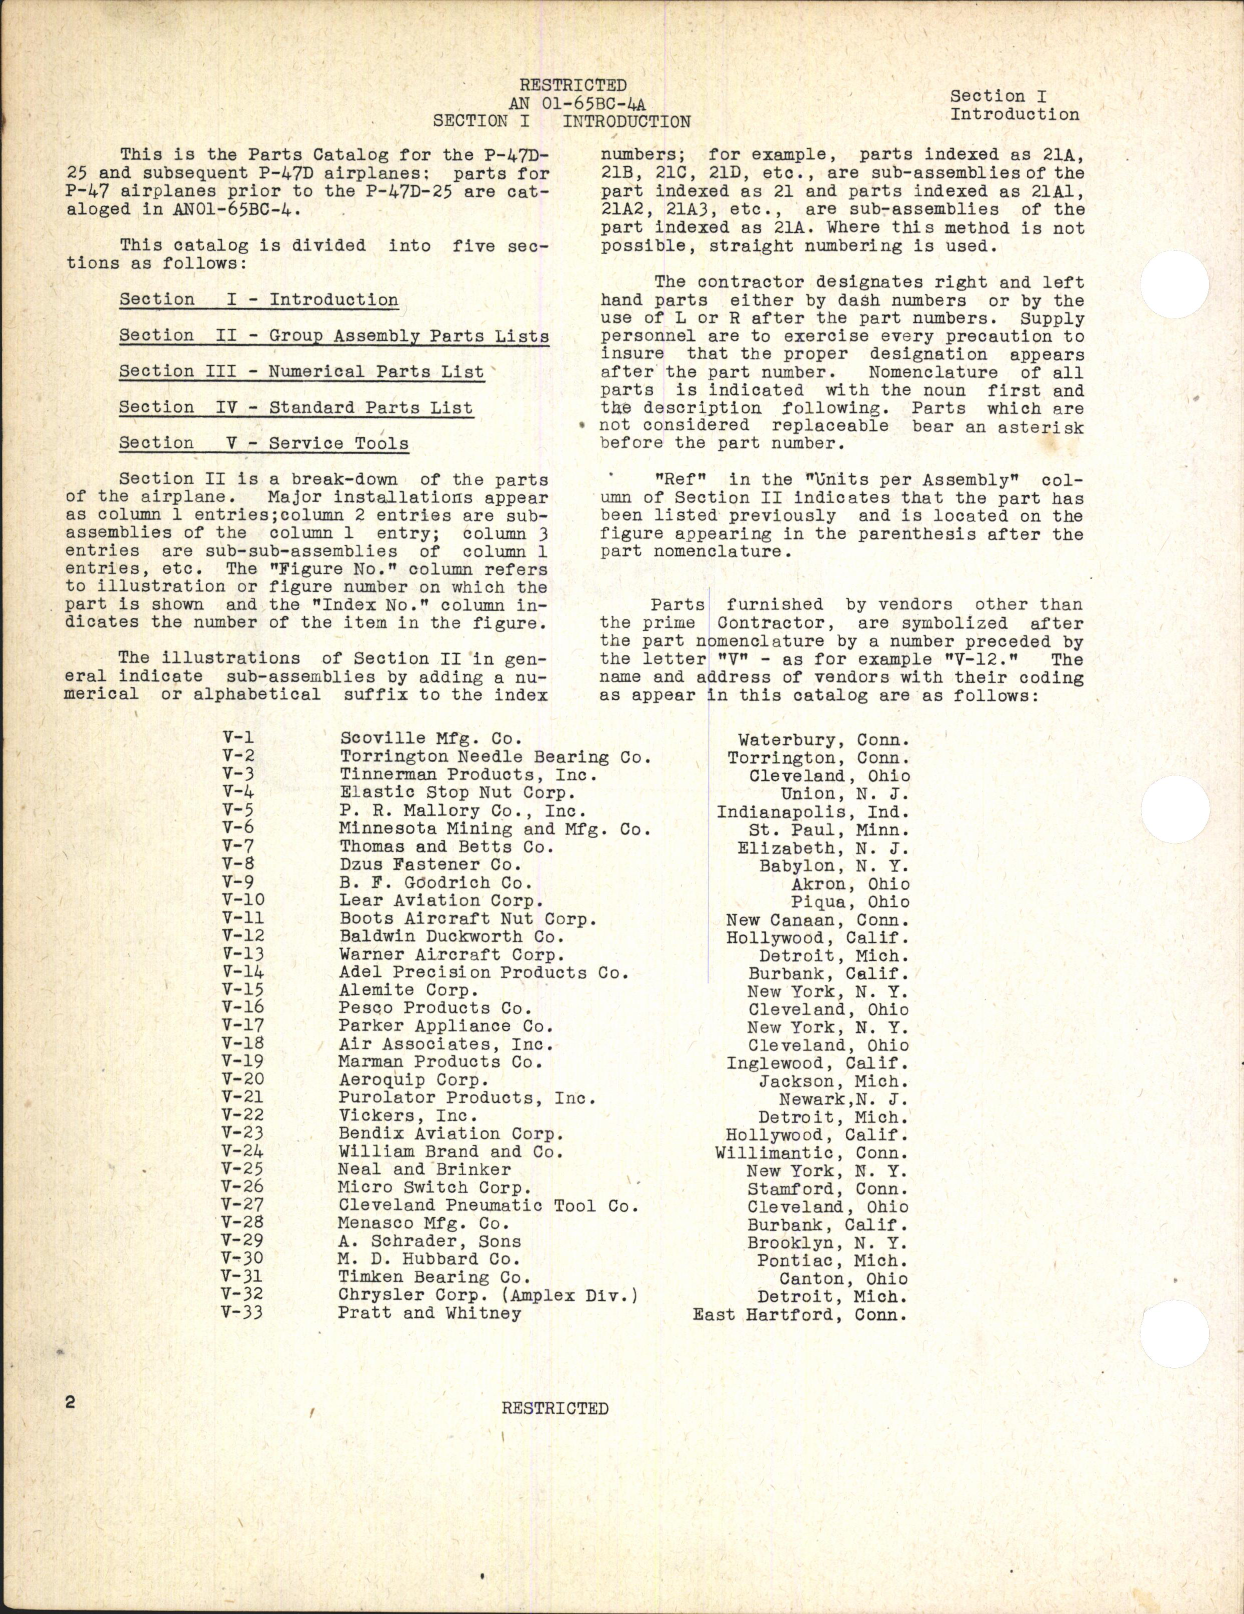 Sample page 8 from AirCorps Library document: Parts Catalog for P-47D-25 Through P-47D-40